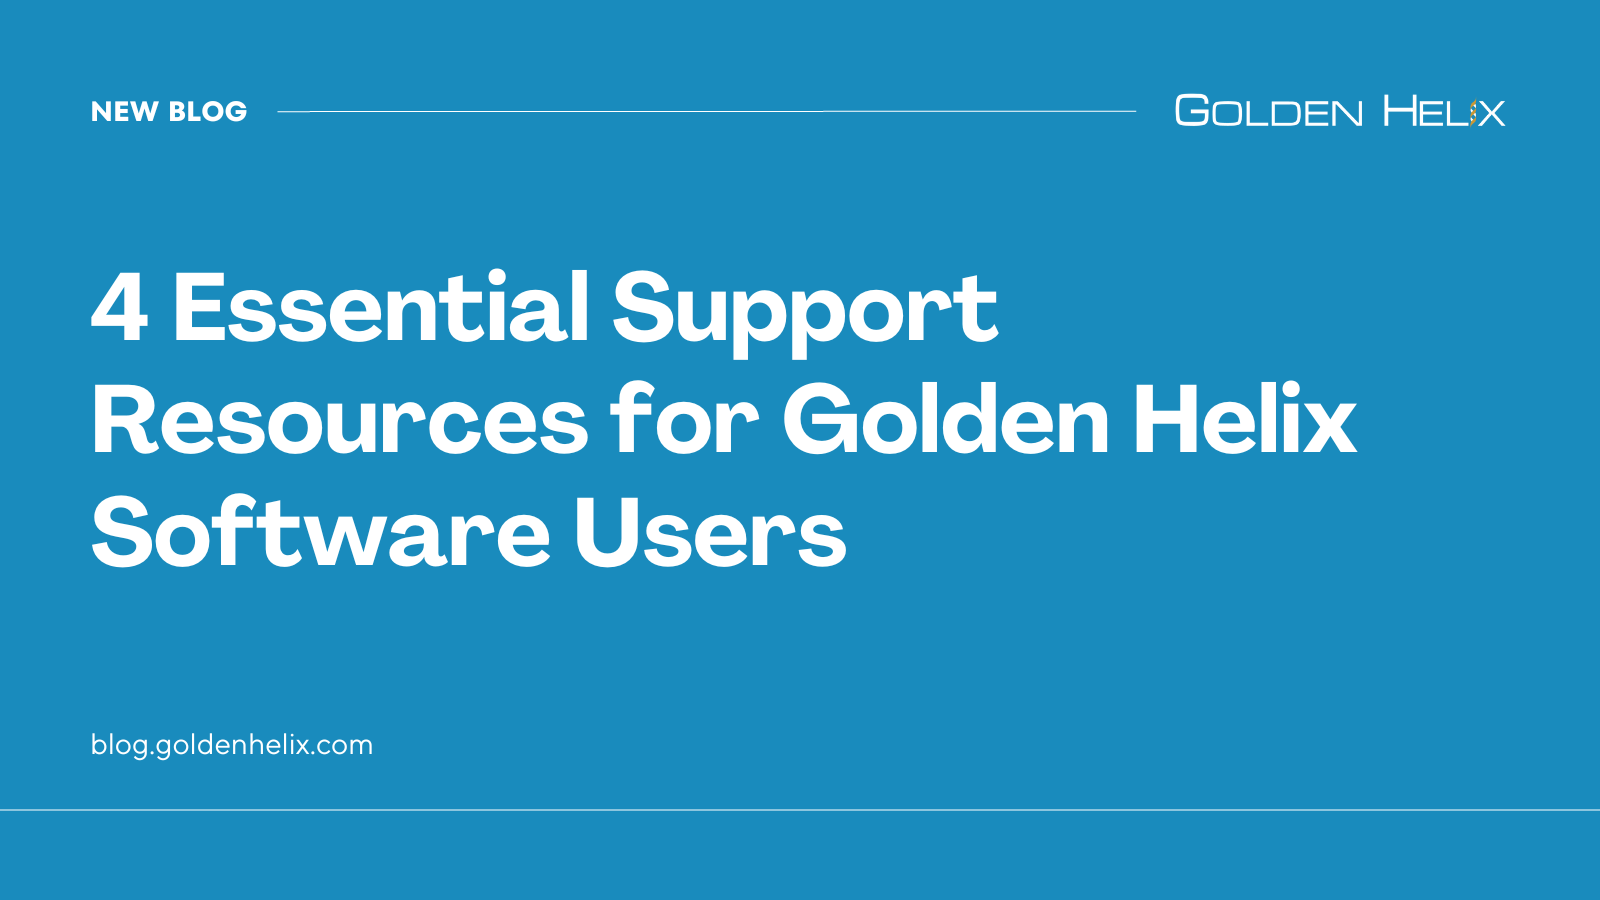 4 Essential Support Resources for Golden Helix Software Users